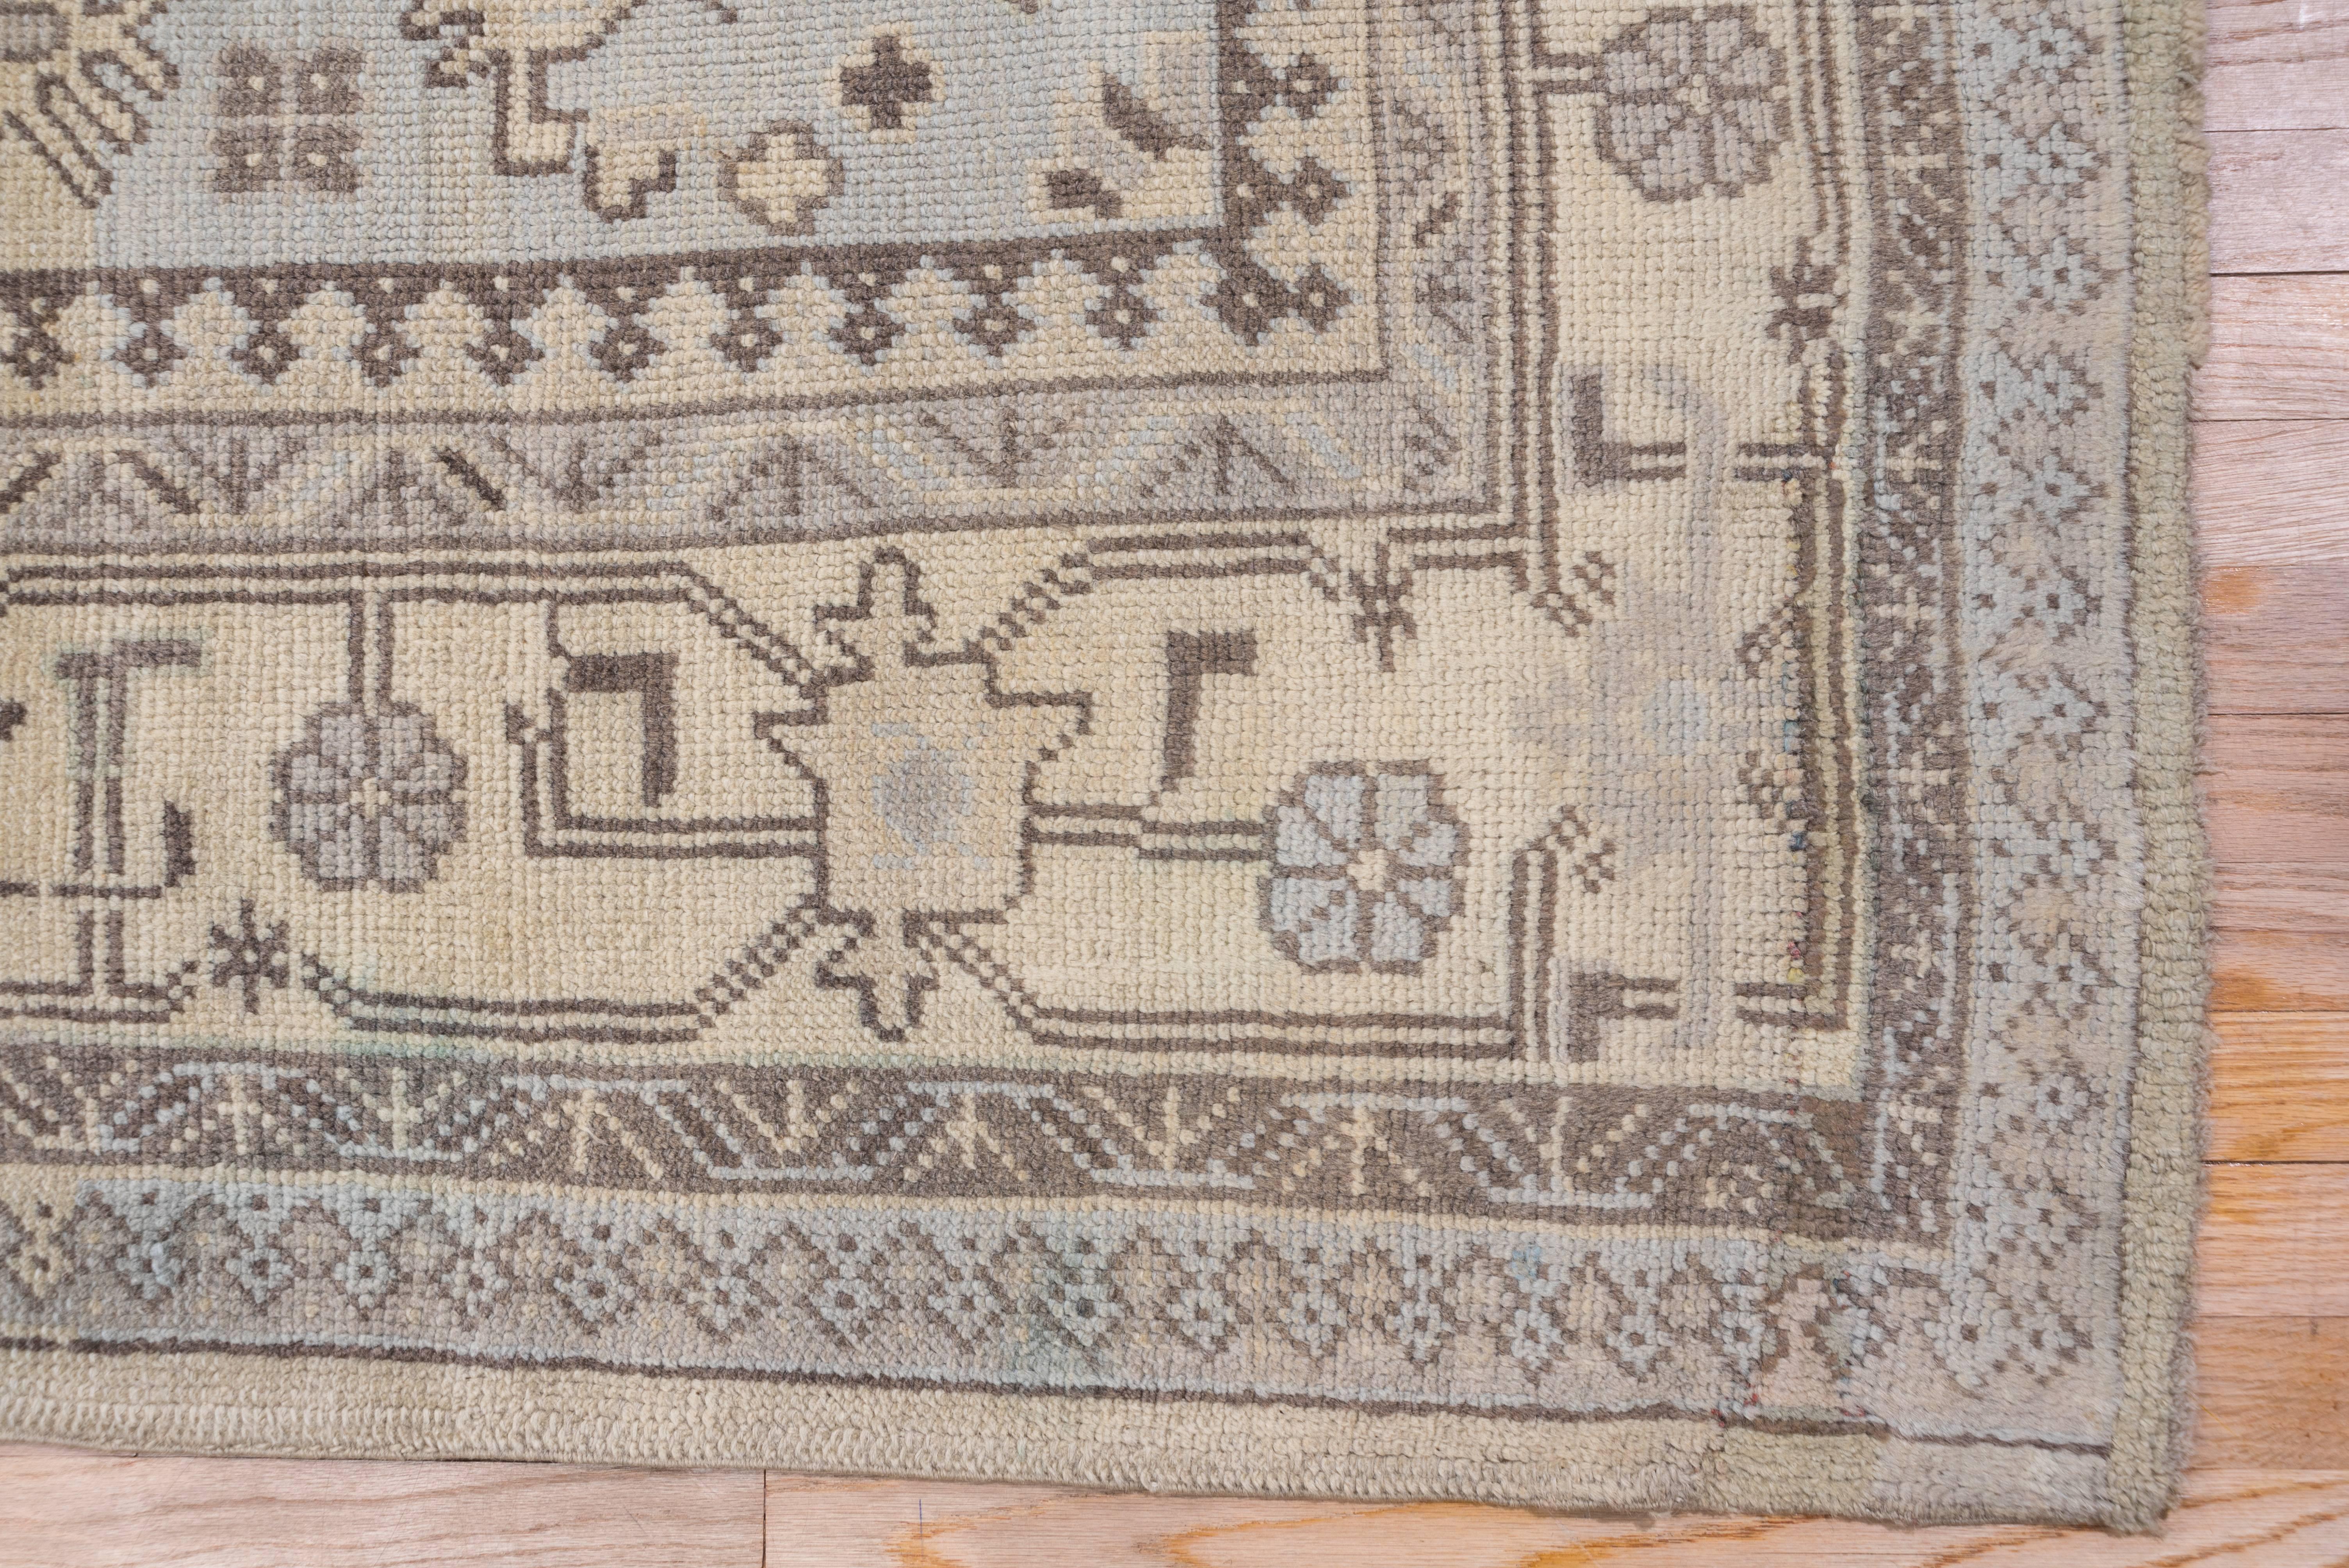 Here is a west Turkish workshop carpet with a stepped, pendanted medallion on a sandy ivory plain field set within stepped corners displaying detached geometric motives. The old ivory main border displays very skeletal turtle palmettes and lollipop